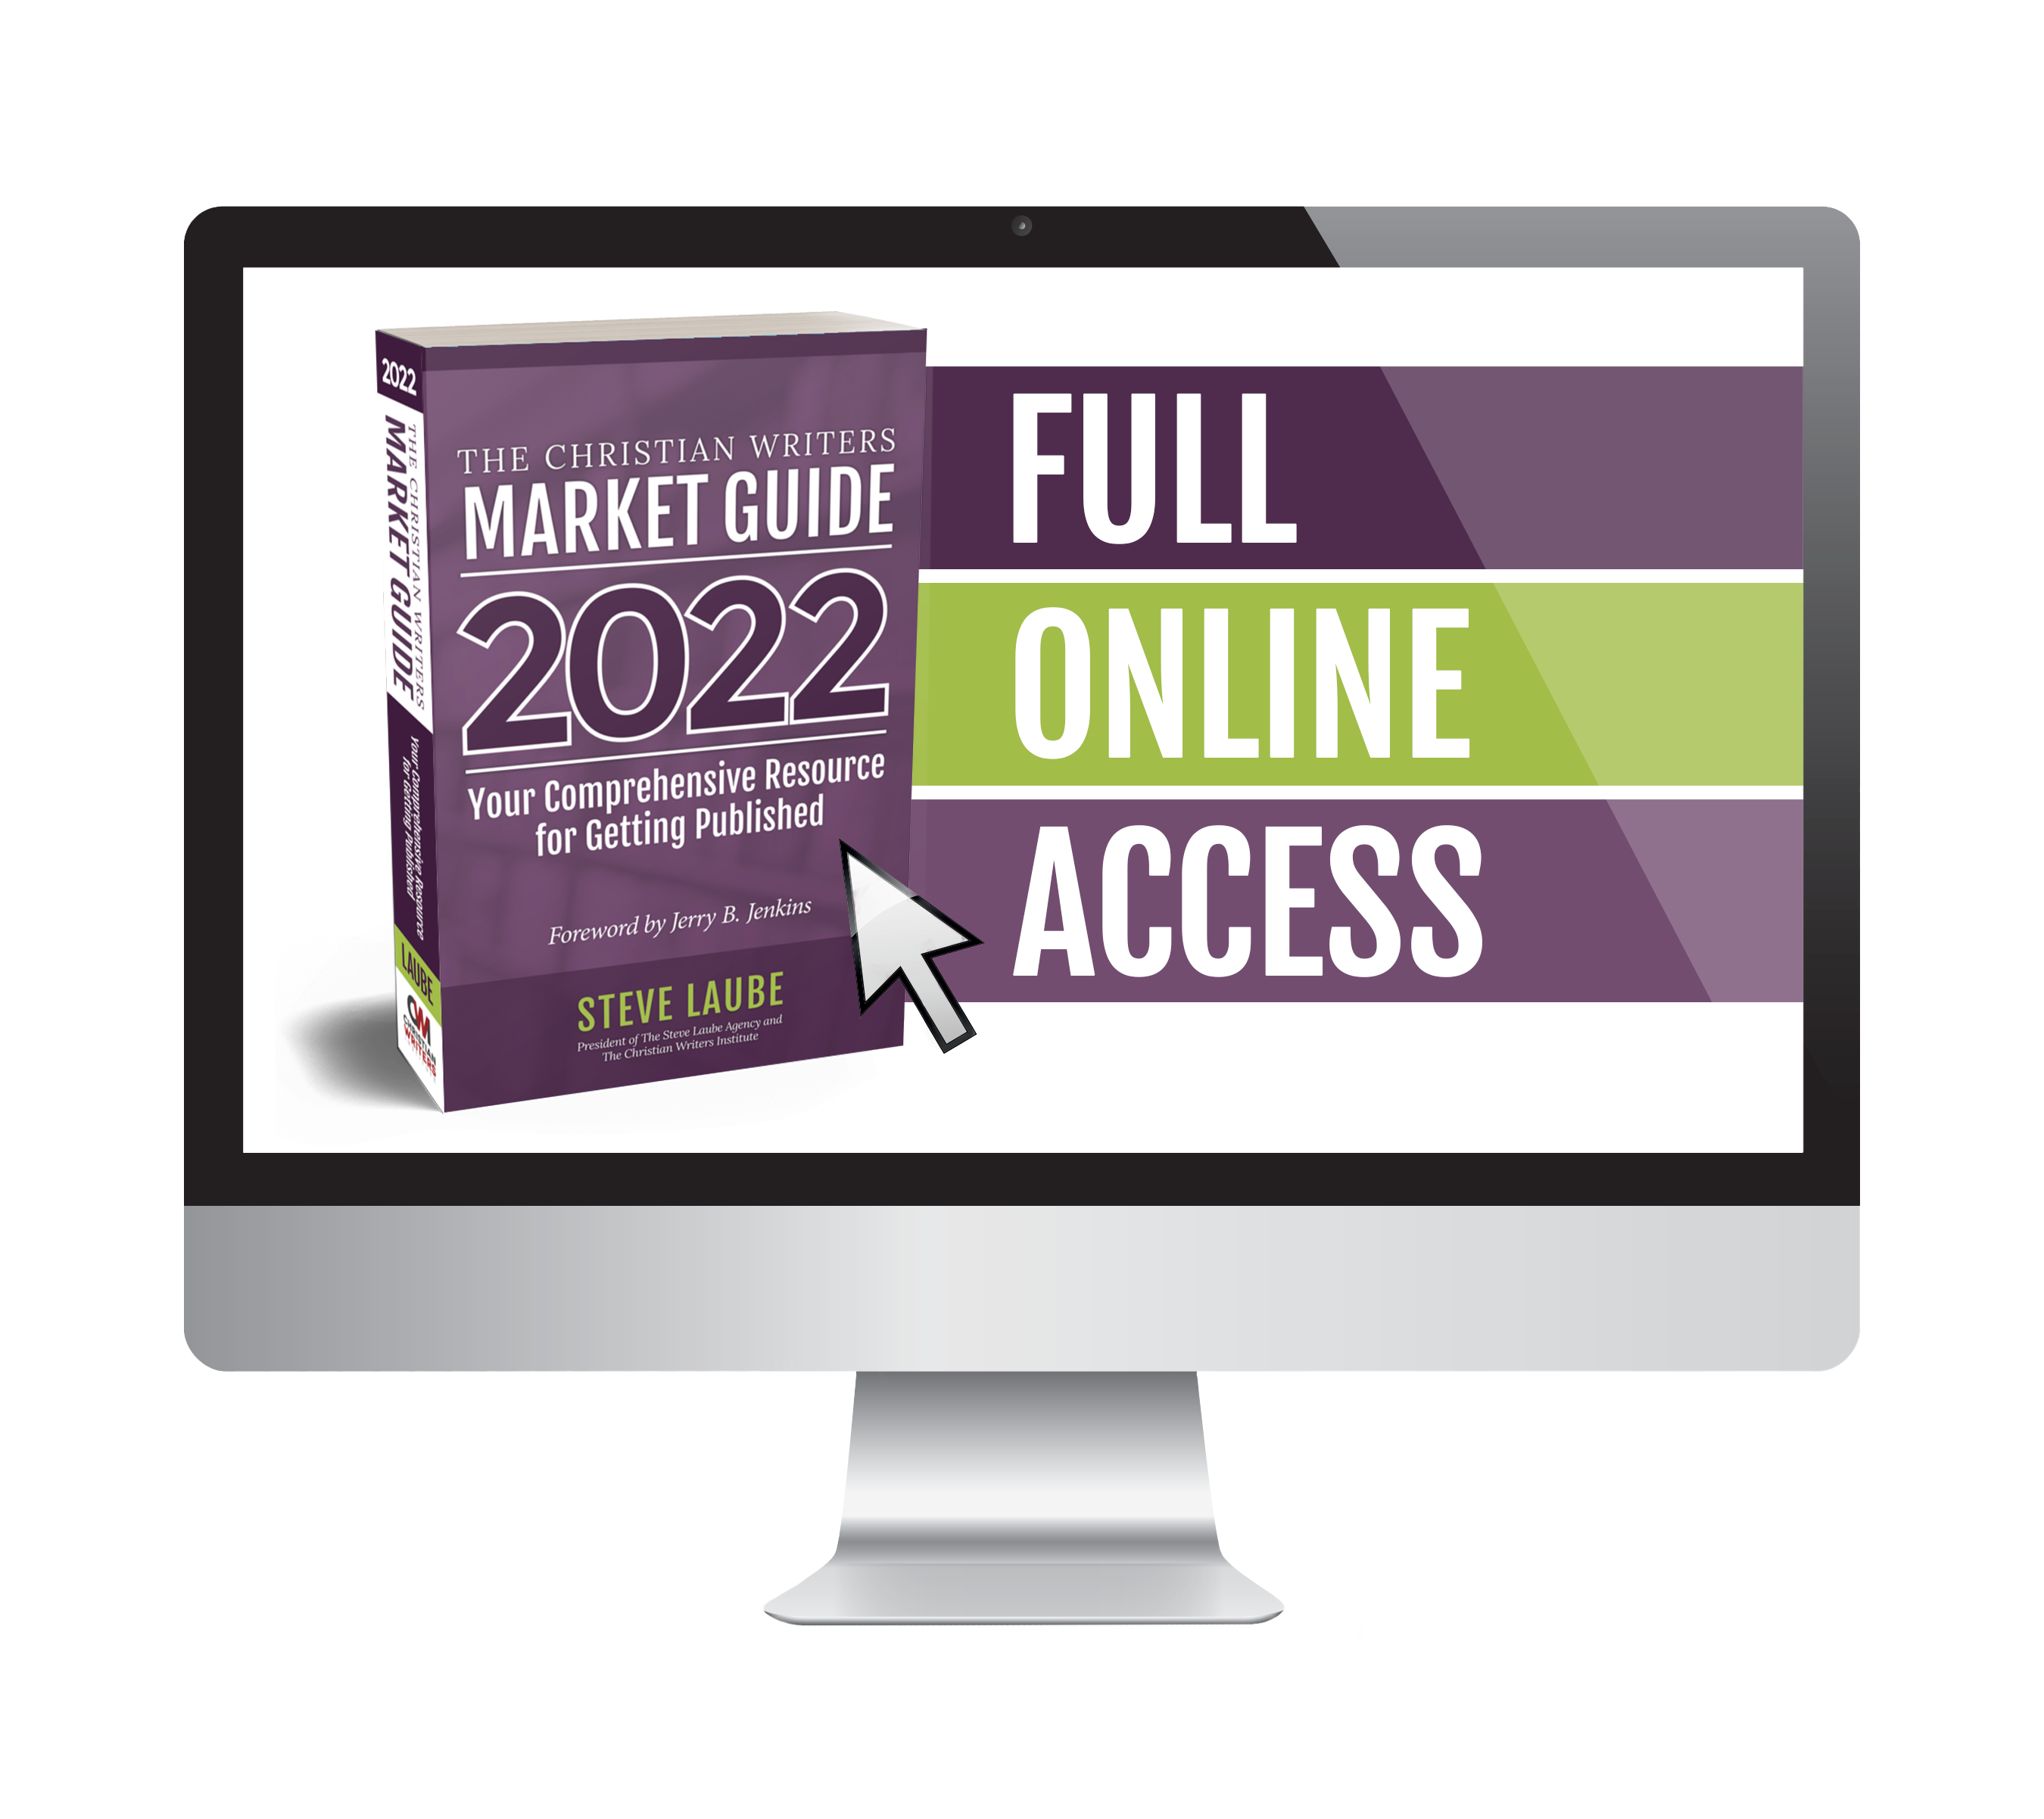 Full Online Access to the Christian Writers Market Guide